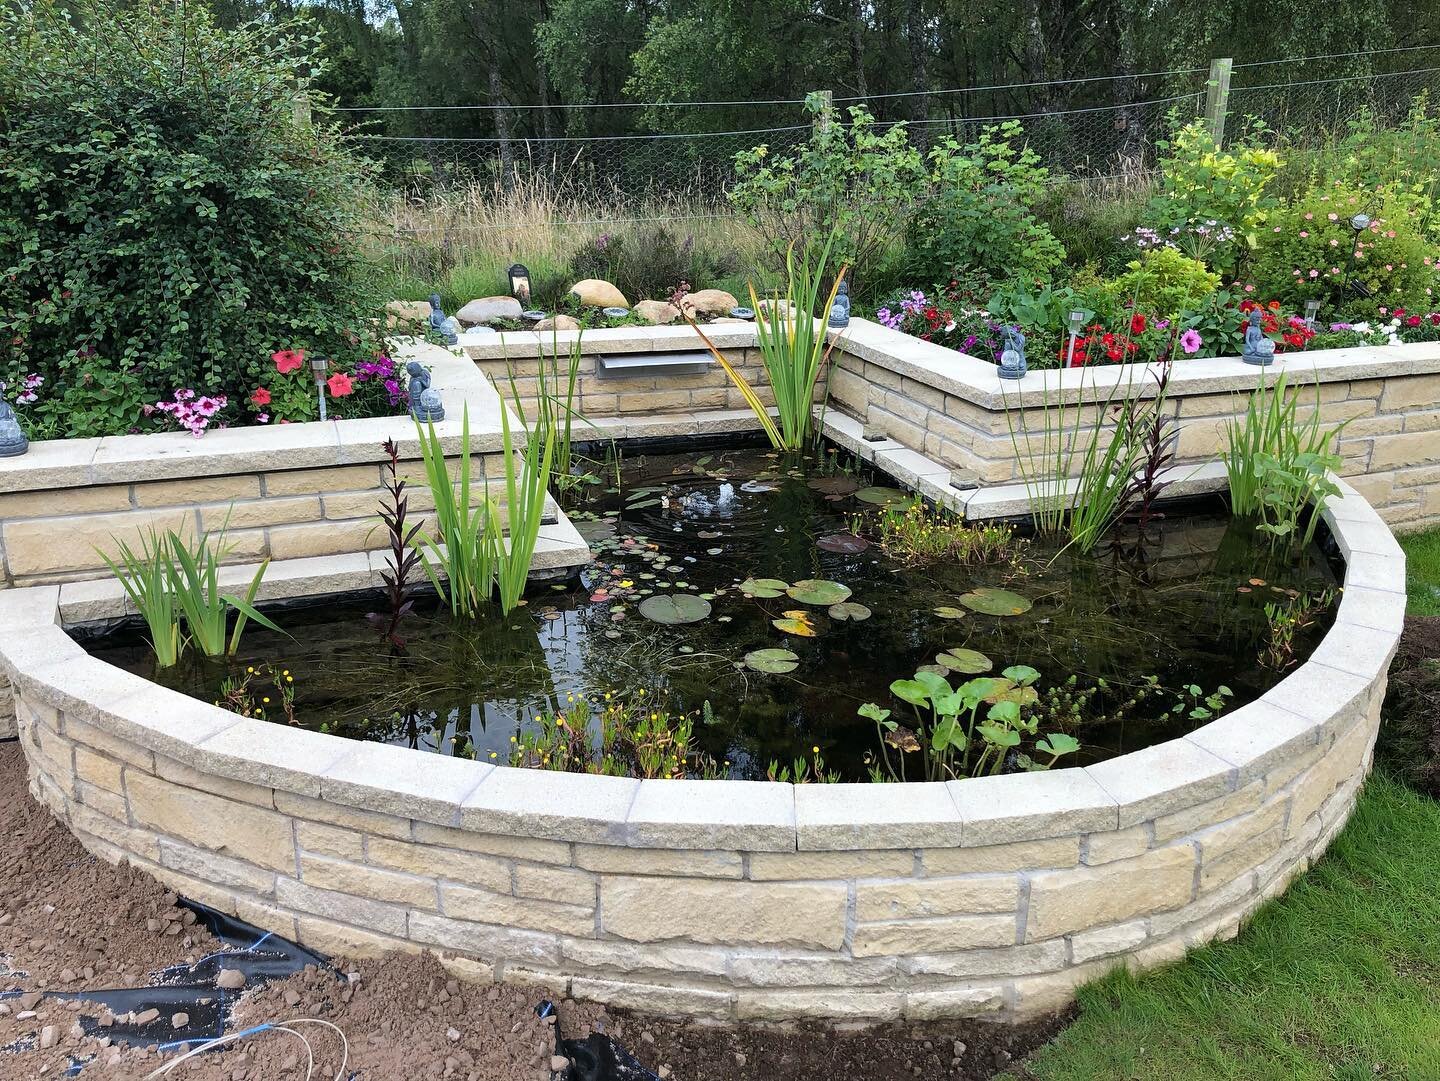 Some more lovely langscaping 

This was a lovely project to work on, split into two phases. The first phase involved removing an old rotten timber sleeper retaining wall that was failing, with a lovely decorative block retaining wall. The wall has a 